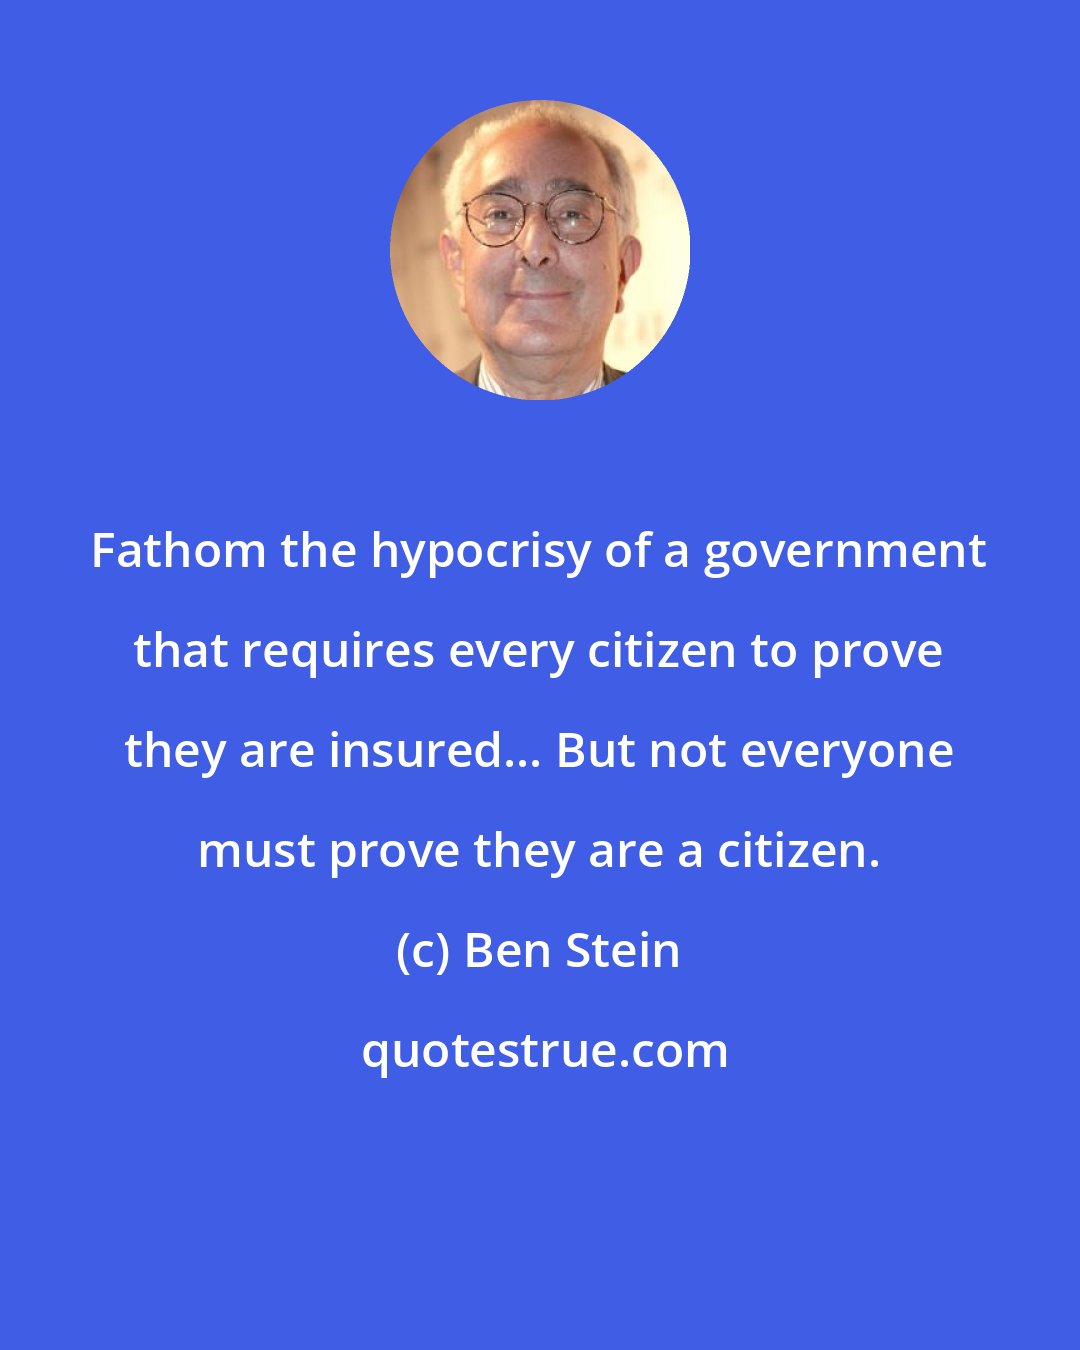 Ben Stein: Fathom the hypocrisy of a government that requires every citizen to prove they are insured... But not everyone must prove they are a citizen.